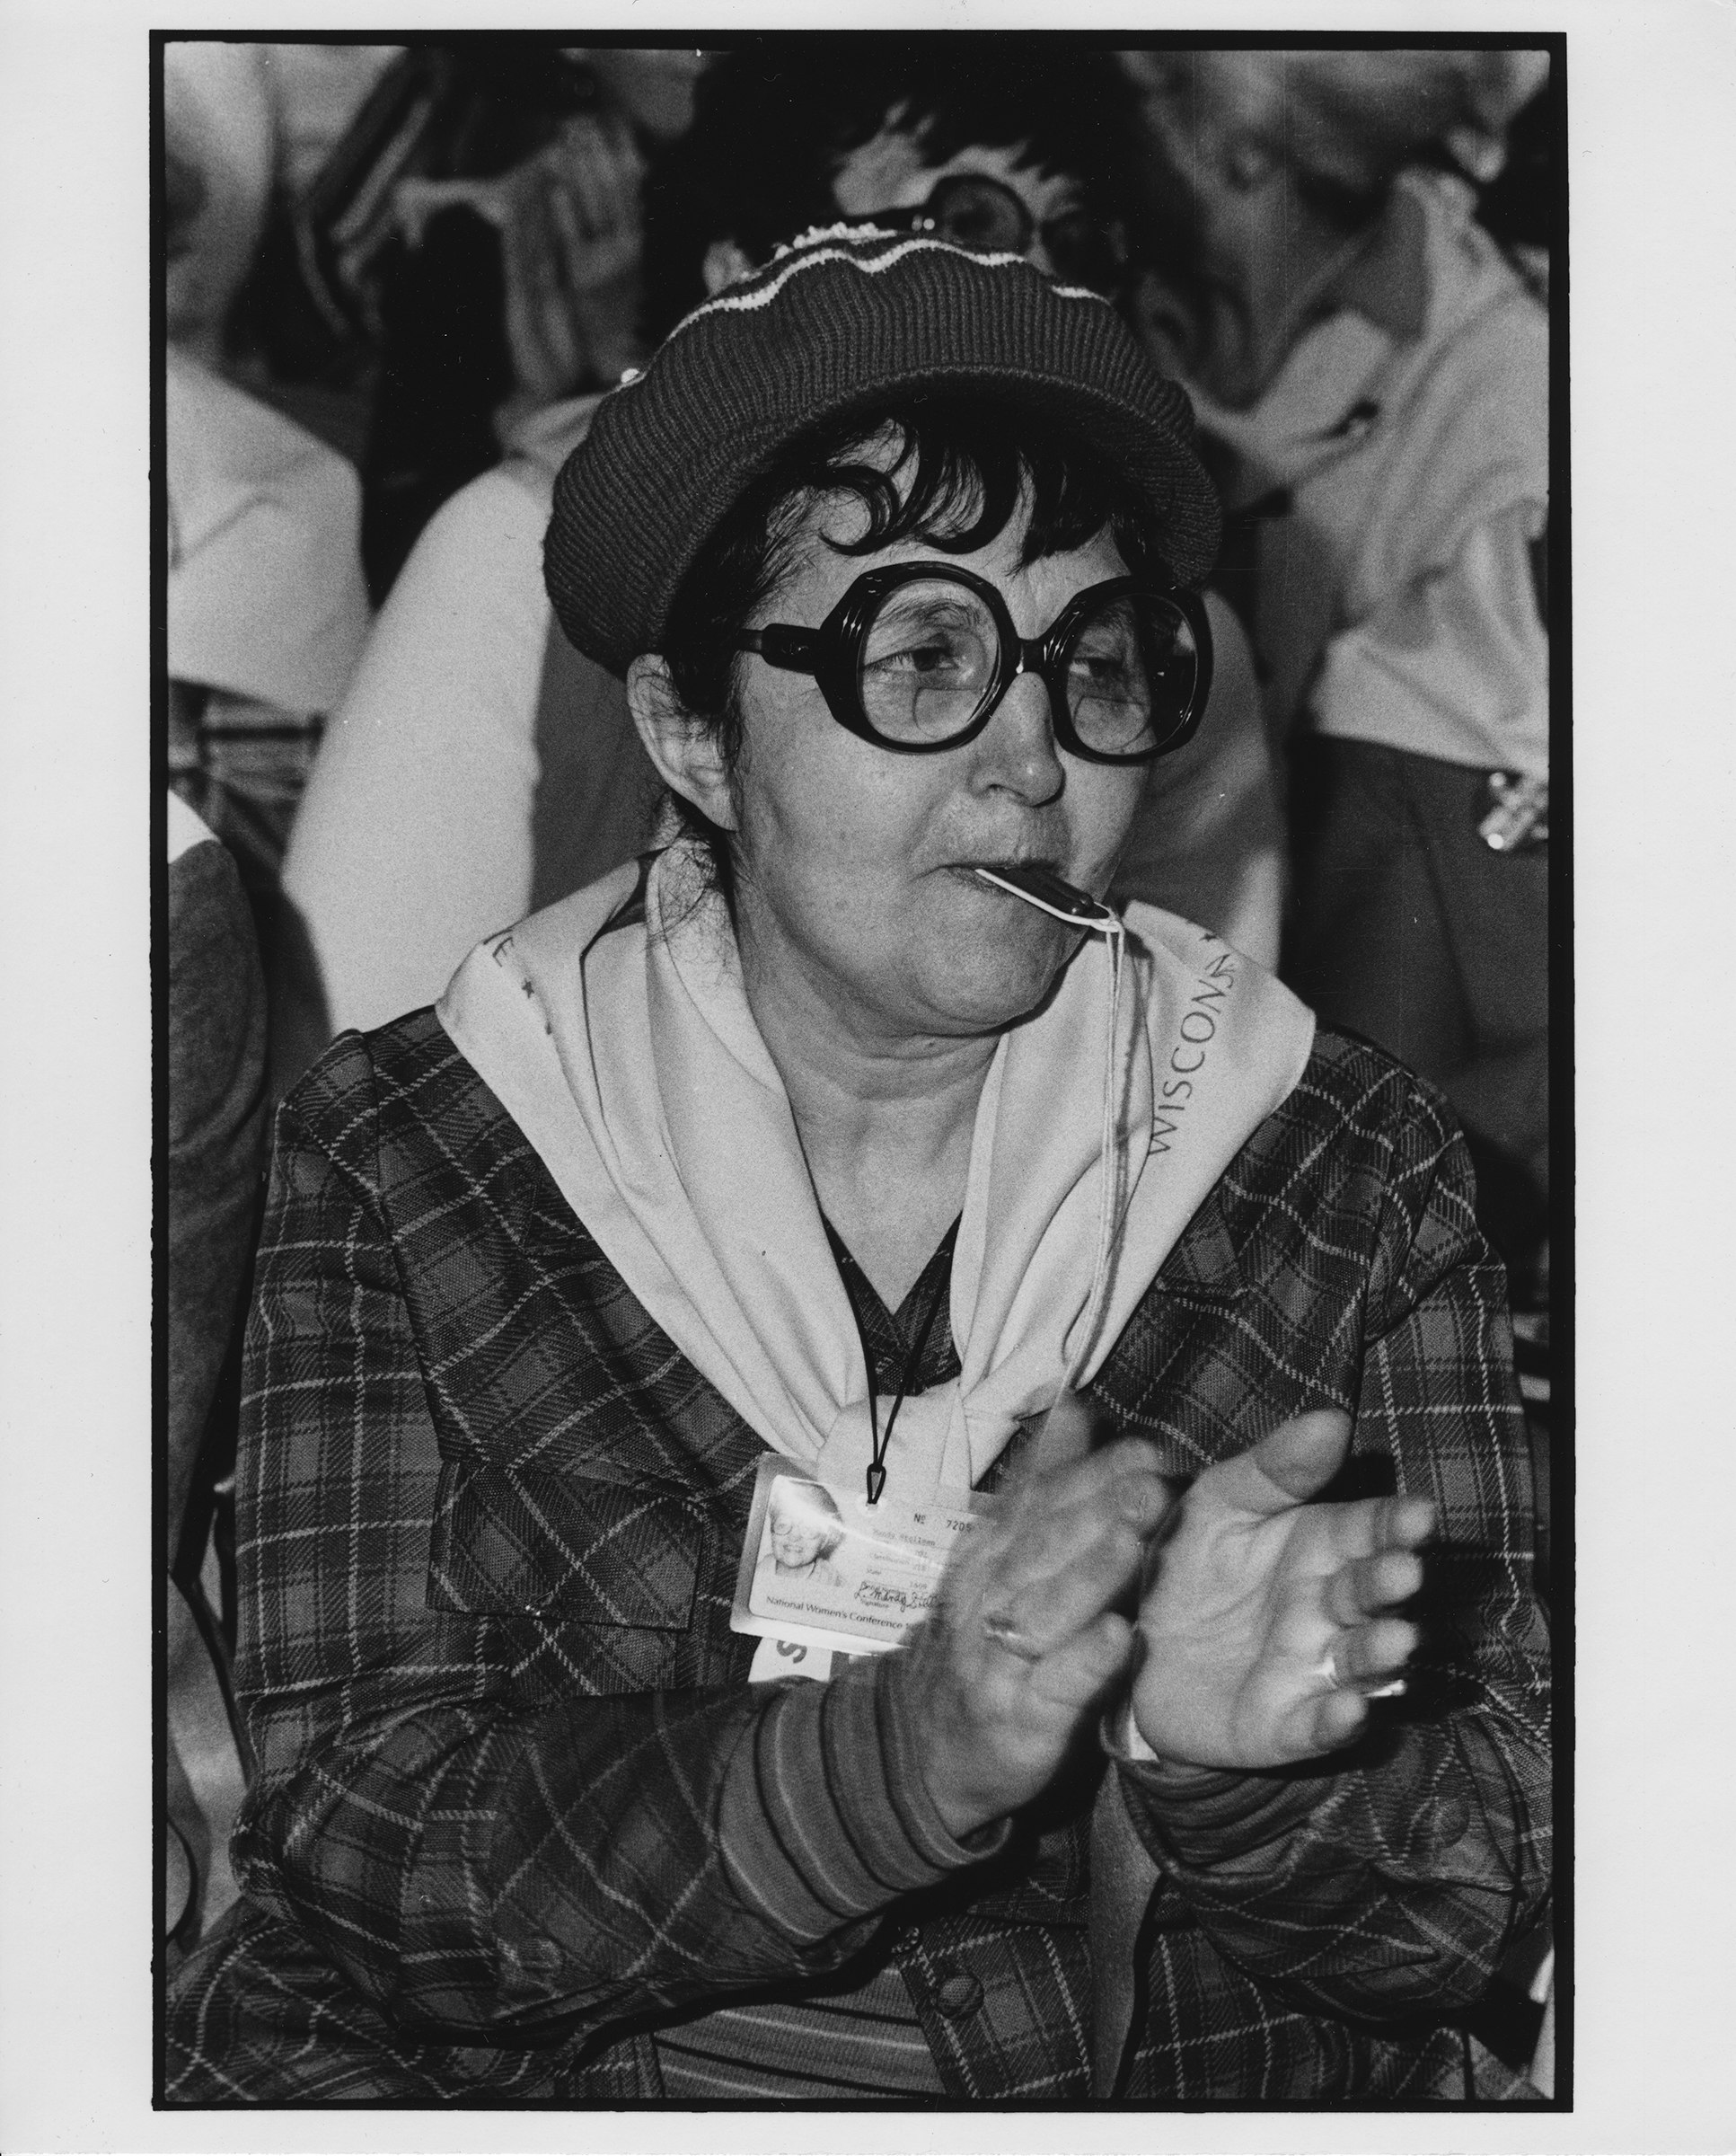 J. Mandy Stellman, wearing bold black round glasses and a jaunty knitted beret, claps while blowing a whistle.